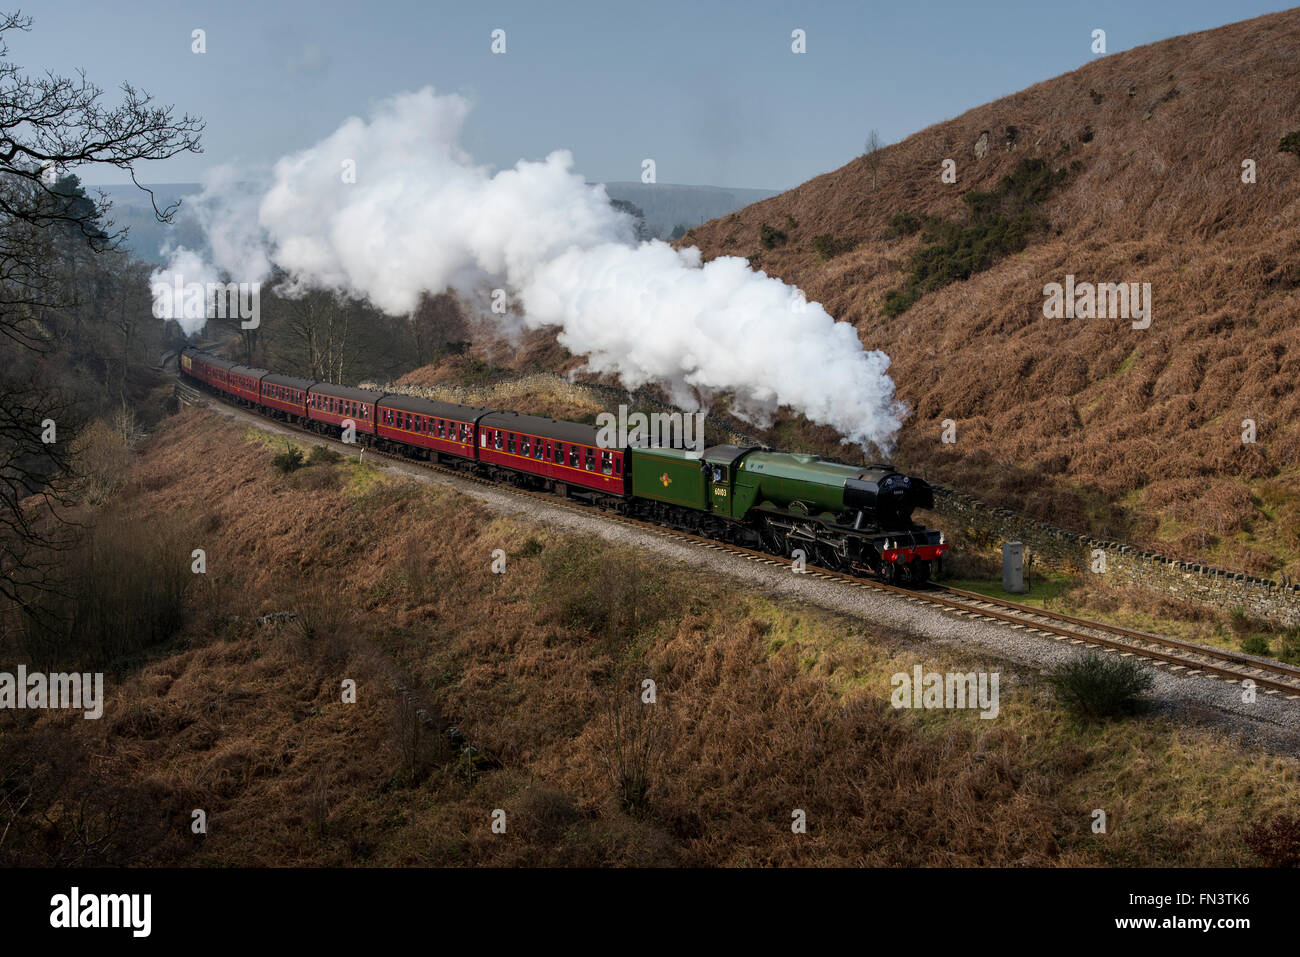 Goathland, North York Moors, UK. 13th March, 2015. Following a £4.2 million overhaul, the LNER Class A3 “Pacific” steam locomotive number 60103 'Flying Scotsman'  returns to passenger service on the North York Moors Railway. In full steam she passes Hawthorn Hill on her approach to Goathland station. Credit:  Dave Pressland/Alamy Live News. Stock Photo